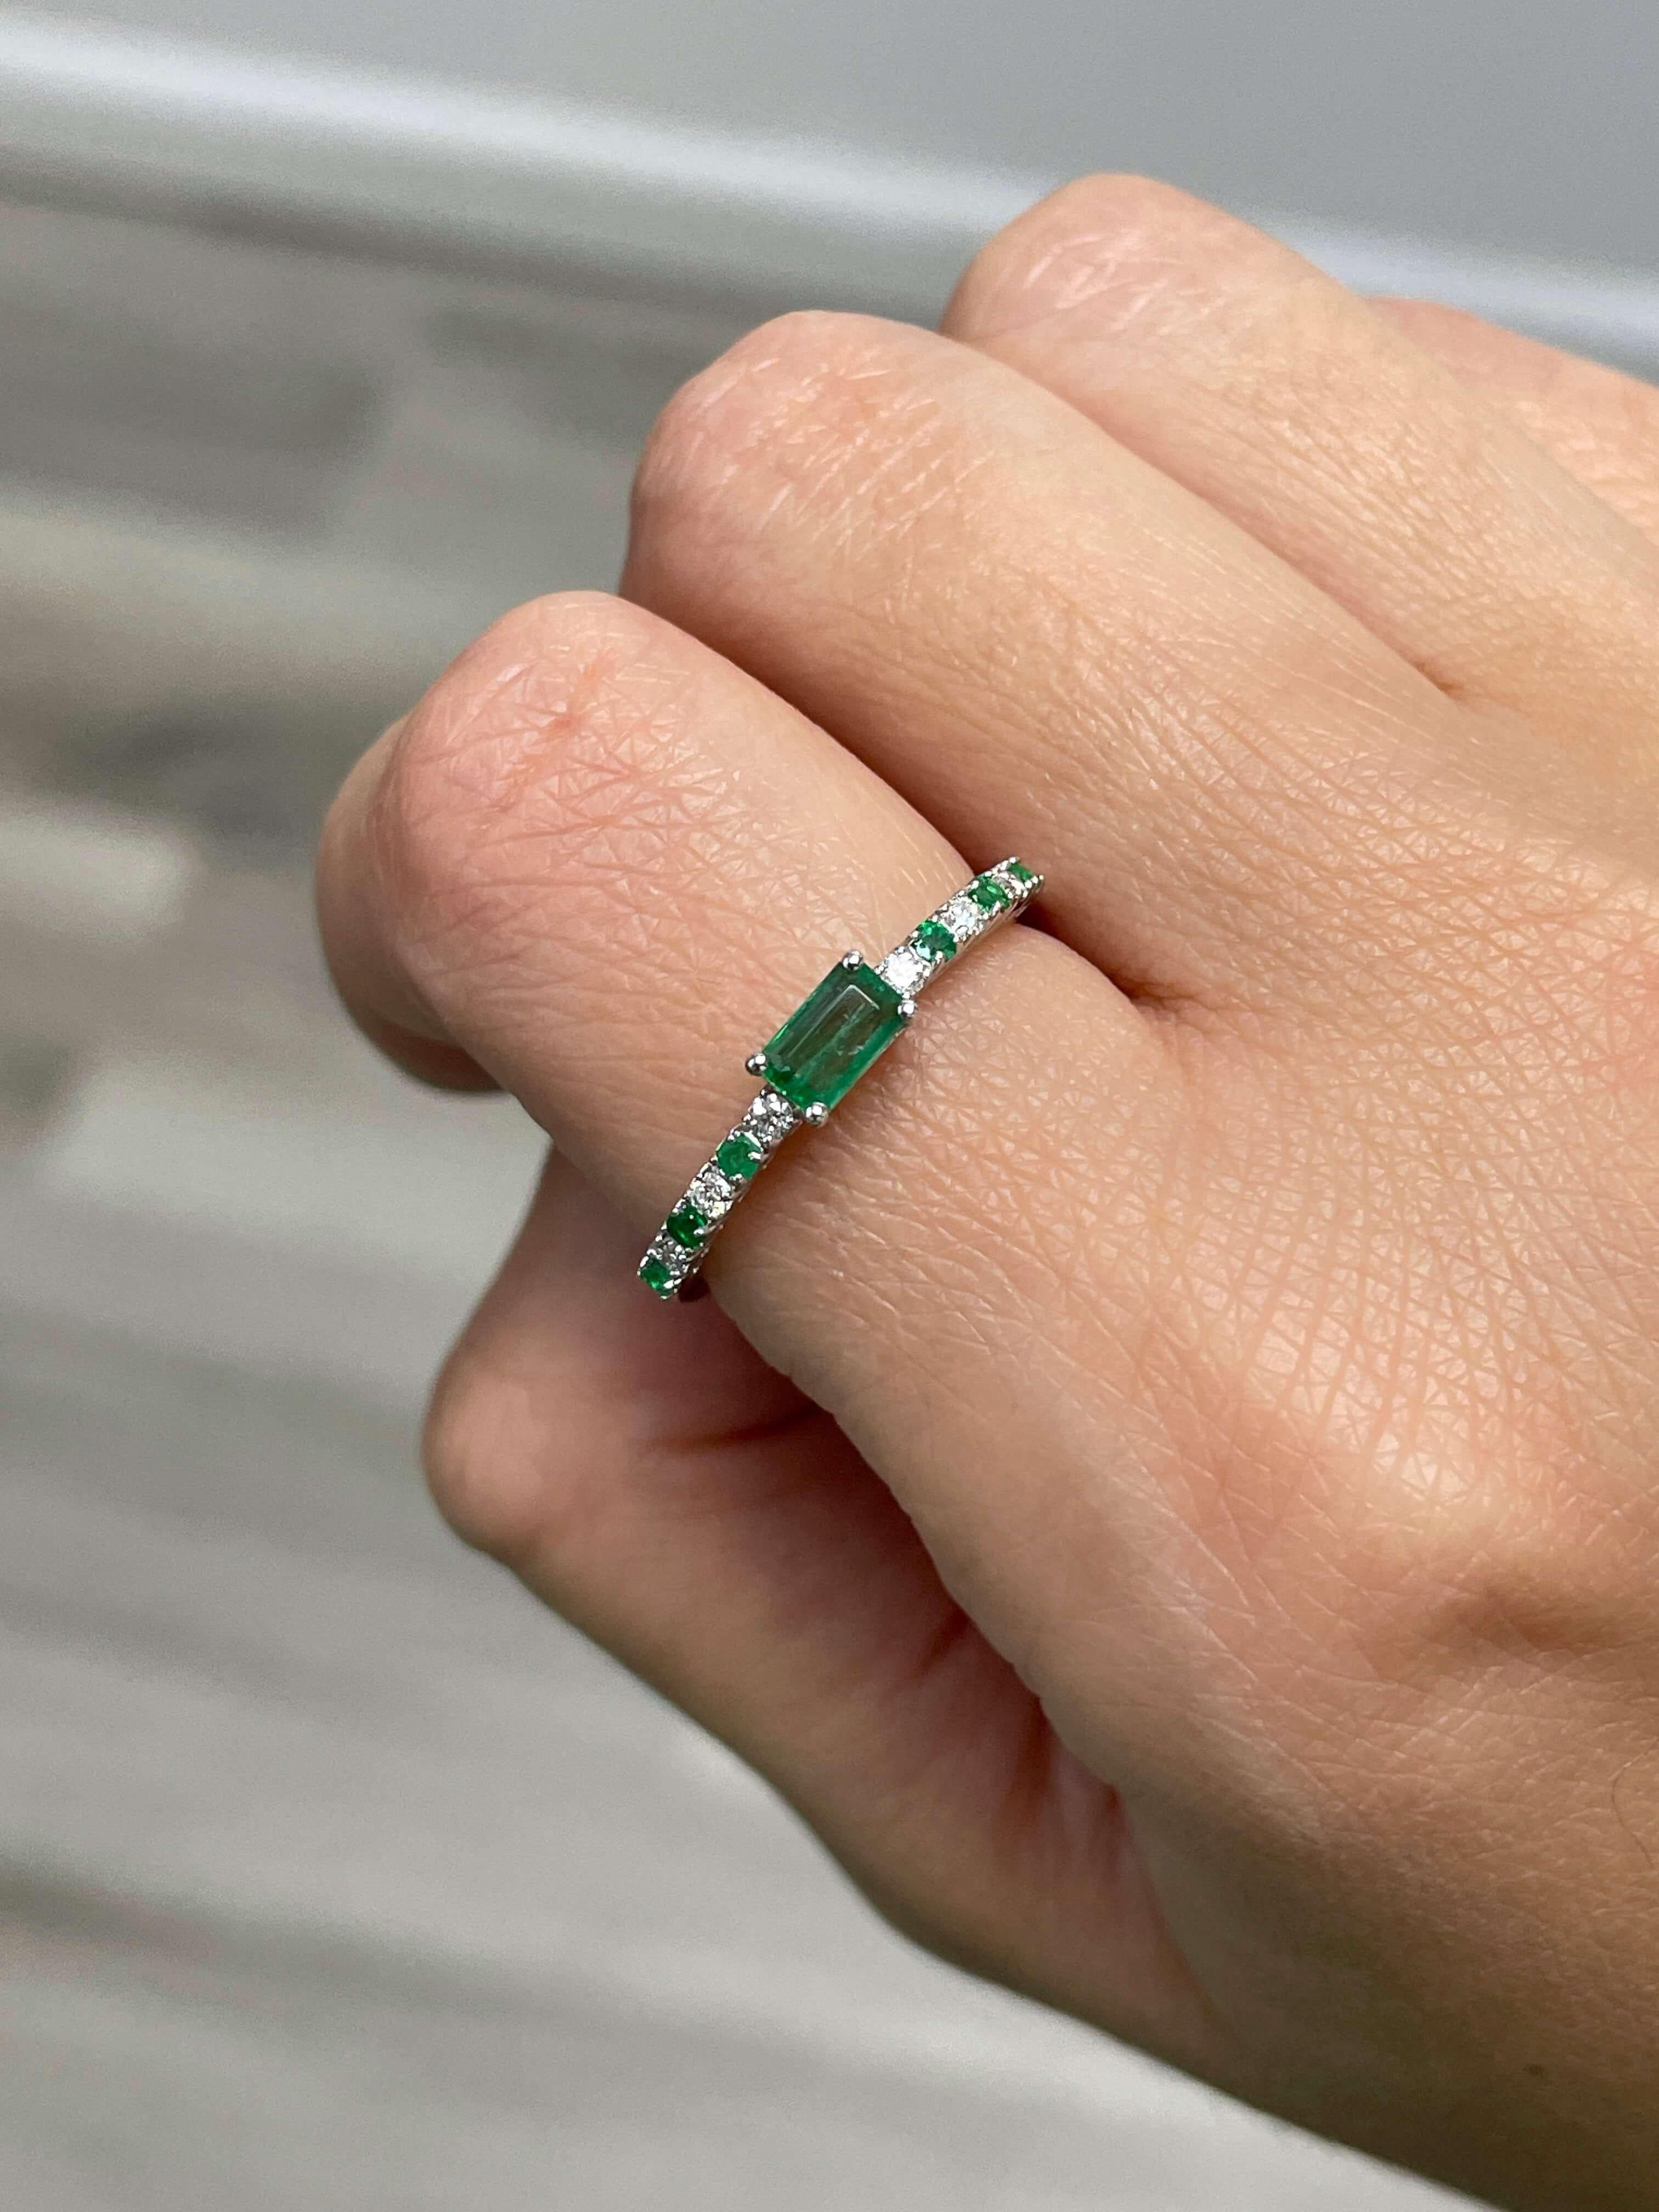 Add a pop of color to your everyday wardrobe with this emerald and diamond ring featuring a beautiful emerald center stone and alternating round diamonds and emeralds. Also available in White Gold.

14K Gold Emerald and Diamond Ring
5 x 3 Center